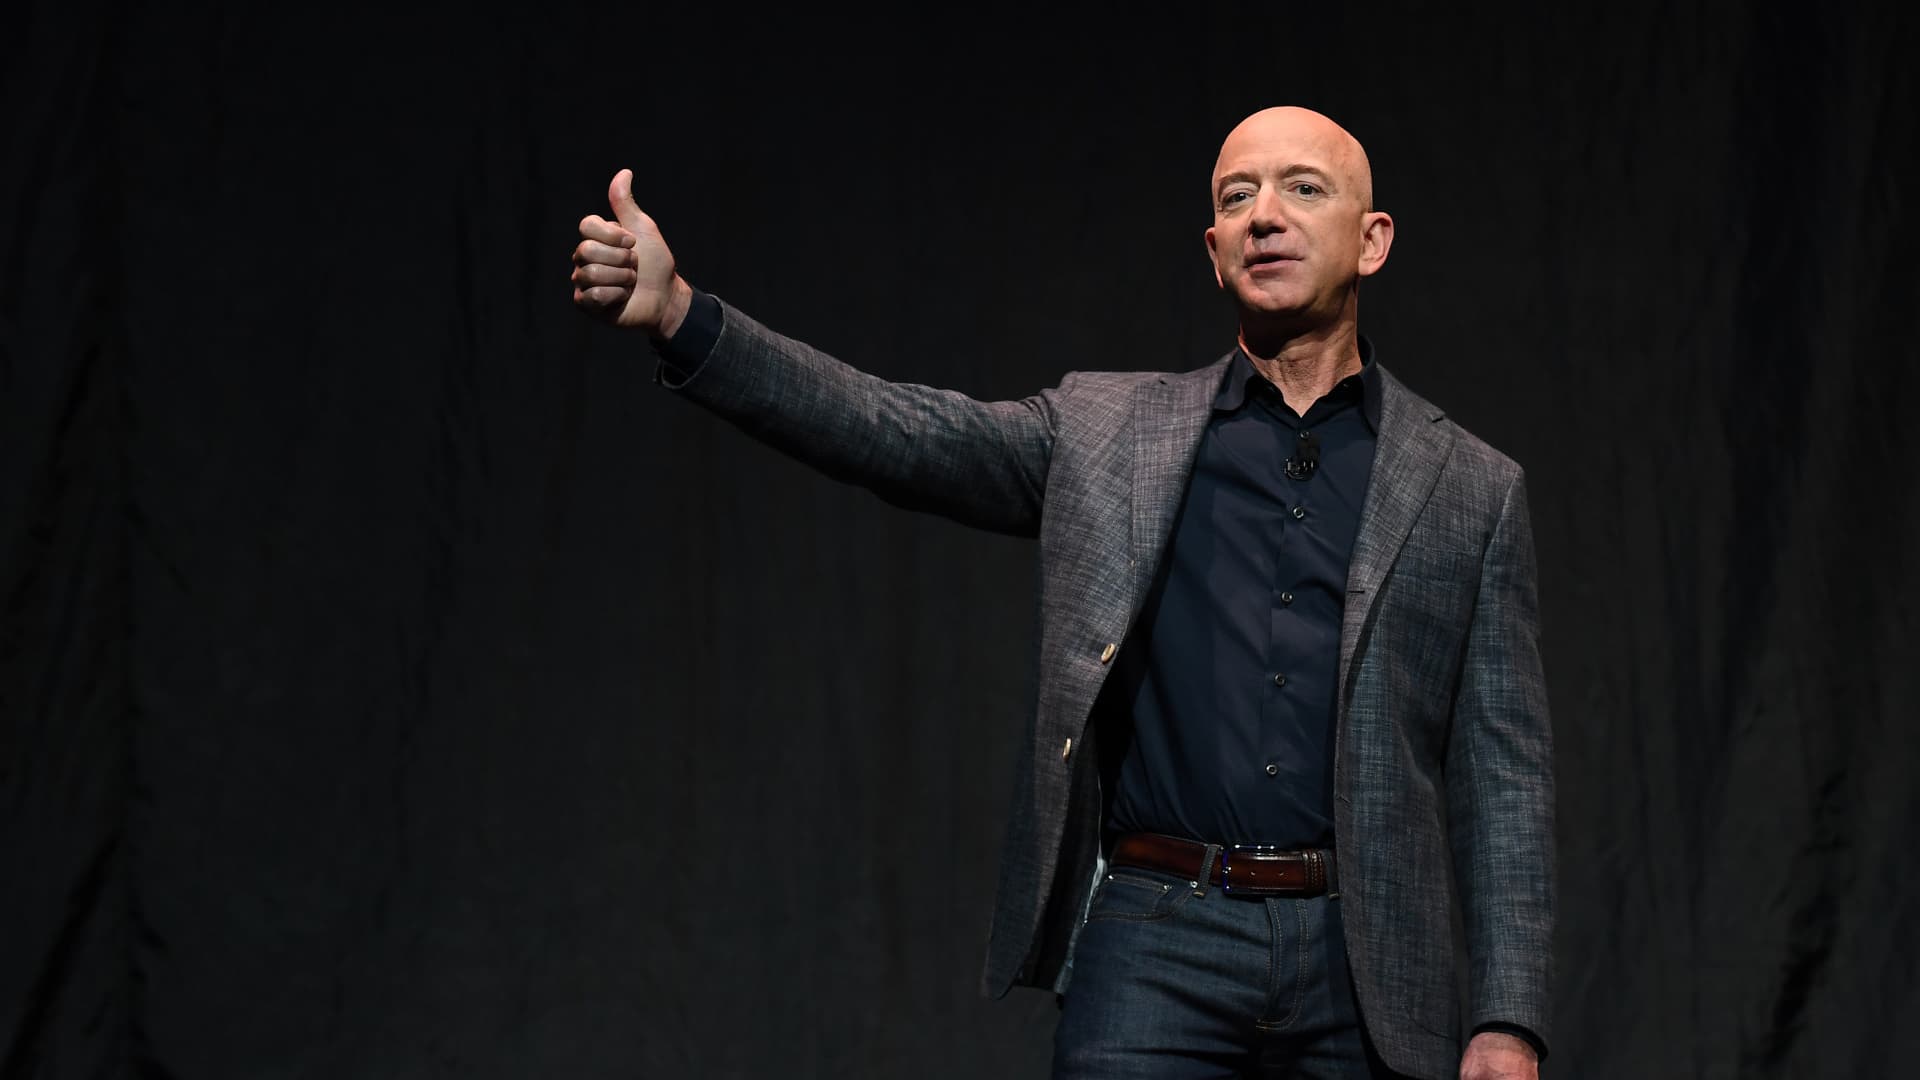 Founder, Chairman, CEO and President of Amazon Jeff Bezos gives a thumbs up as he speaks during an event about Blue Origin's space exploration plans in Washington, U.S., May 9, 2019.